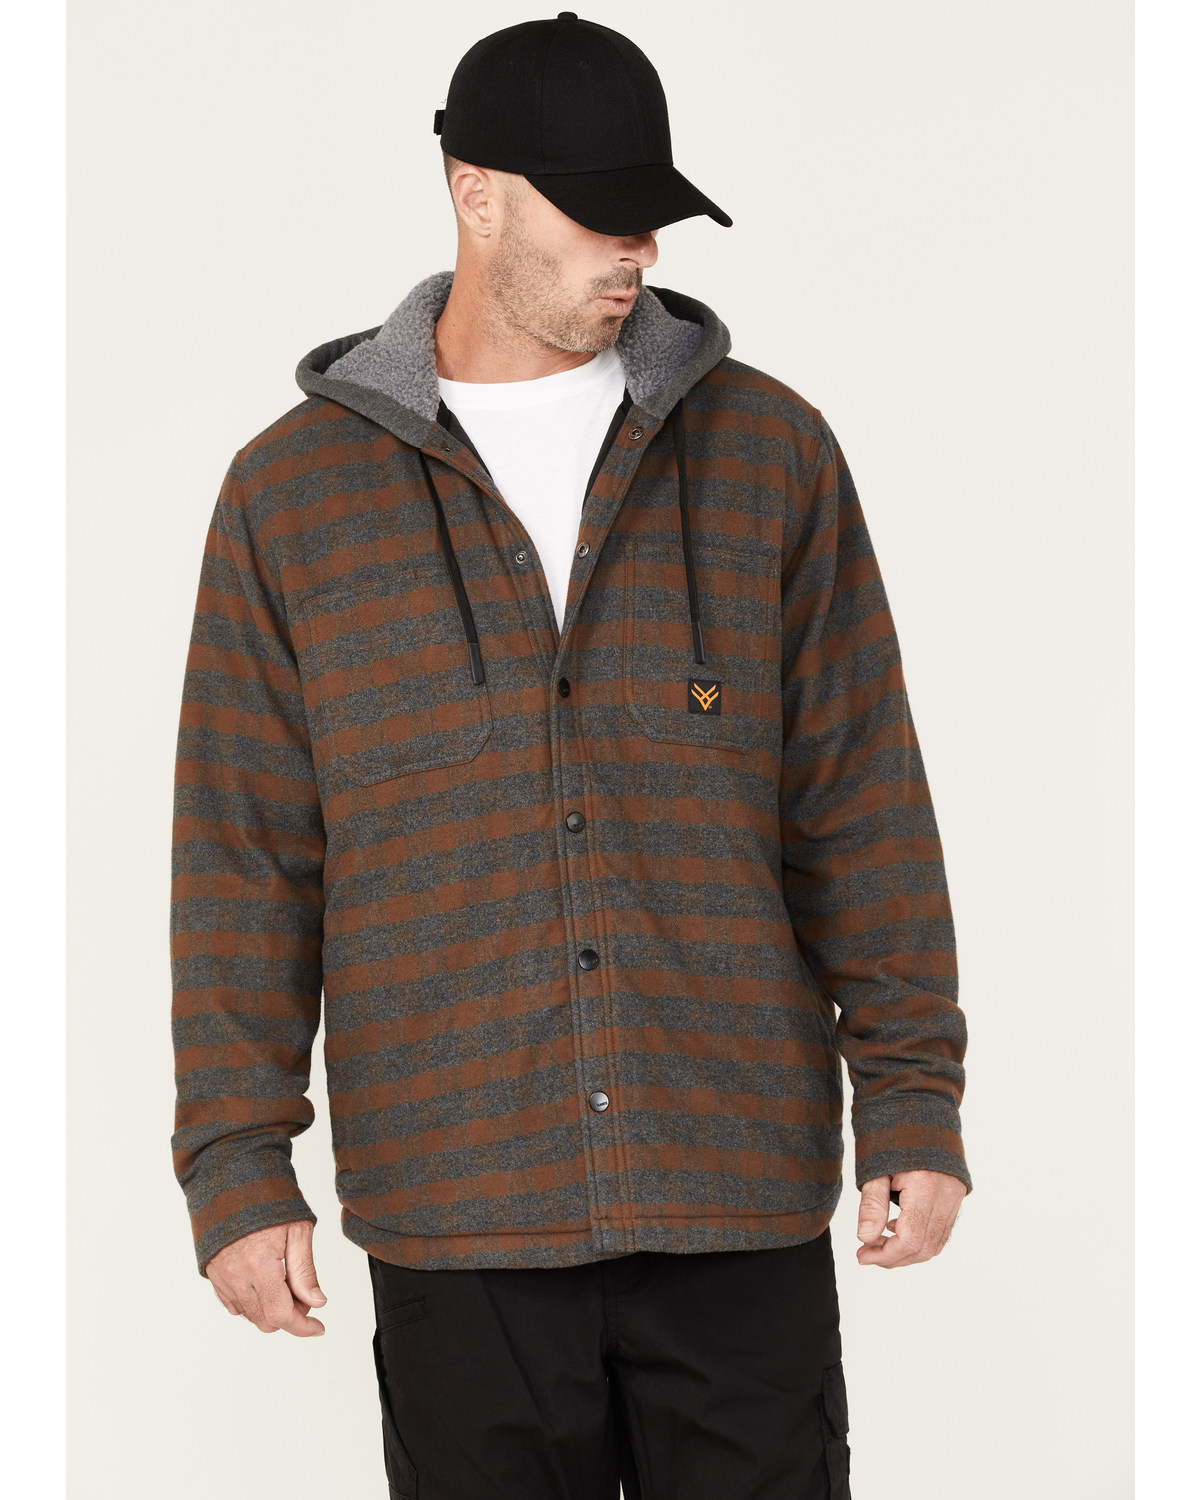 Hawx Men's Insulated Hooded Shirt Jacket